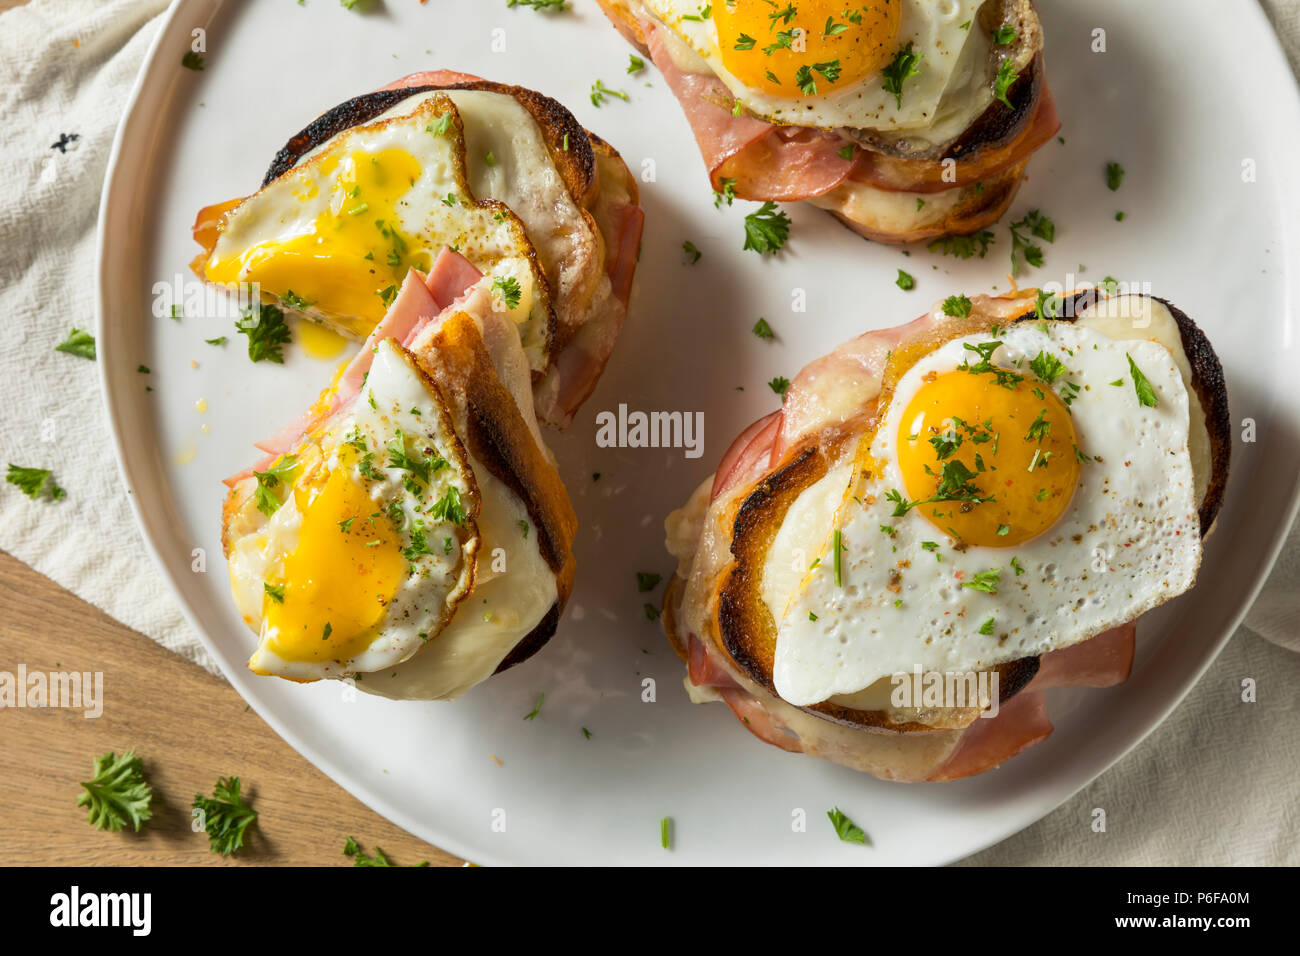 Homemade French Croque Madame Sandwich with Ham and Cheese Stock Photo